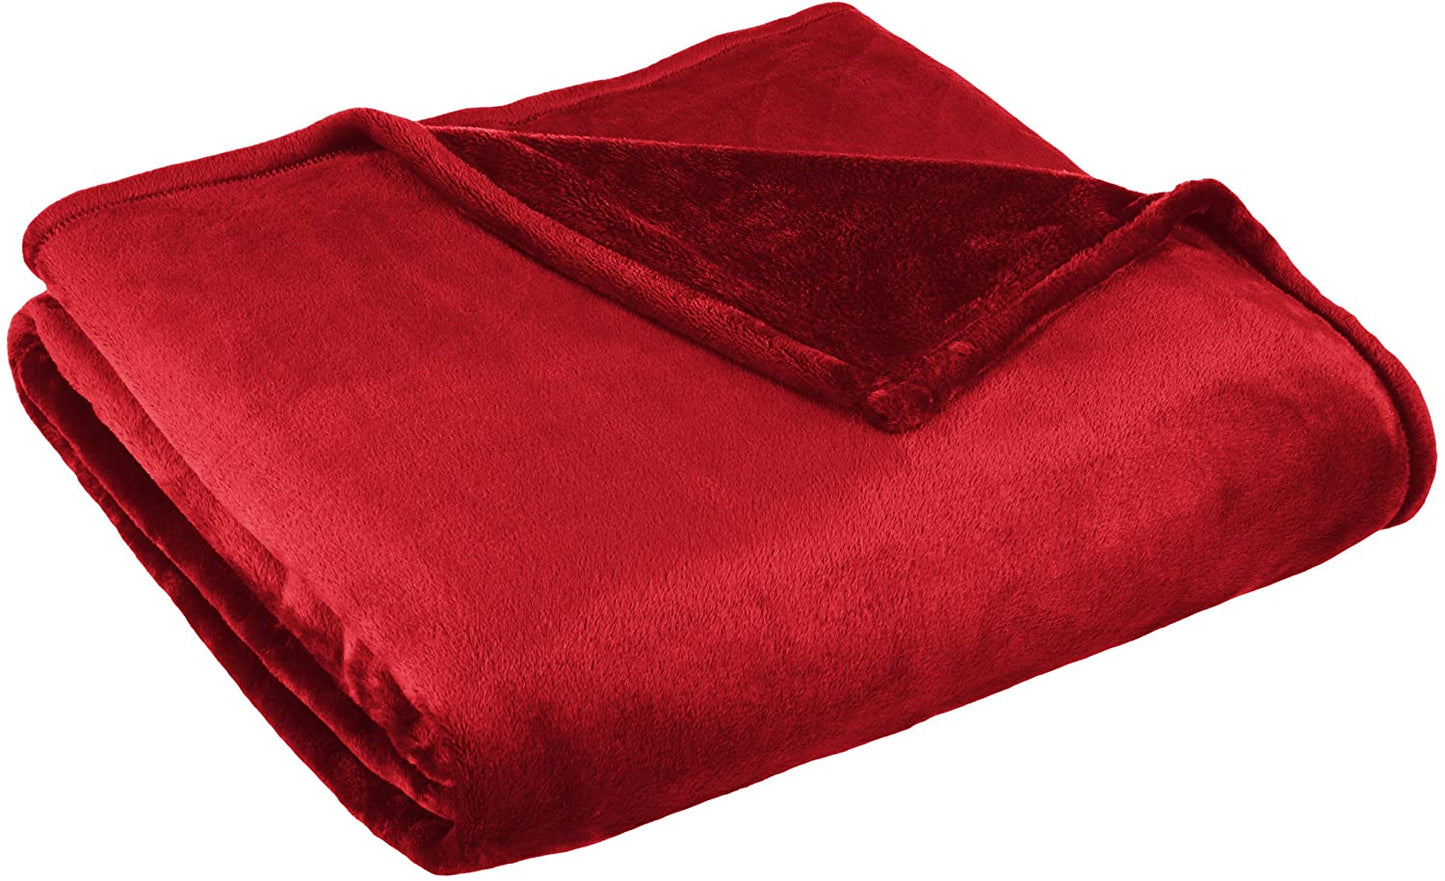 Thesis Cashmere Plush Blanket Full/Queen - Burgundy